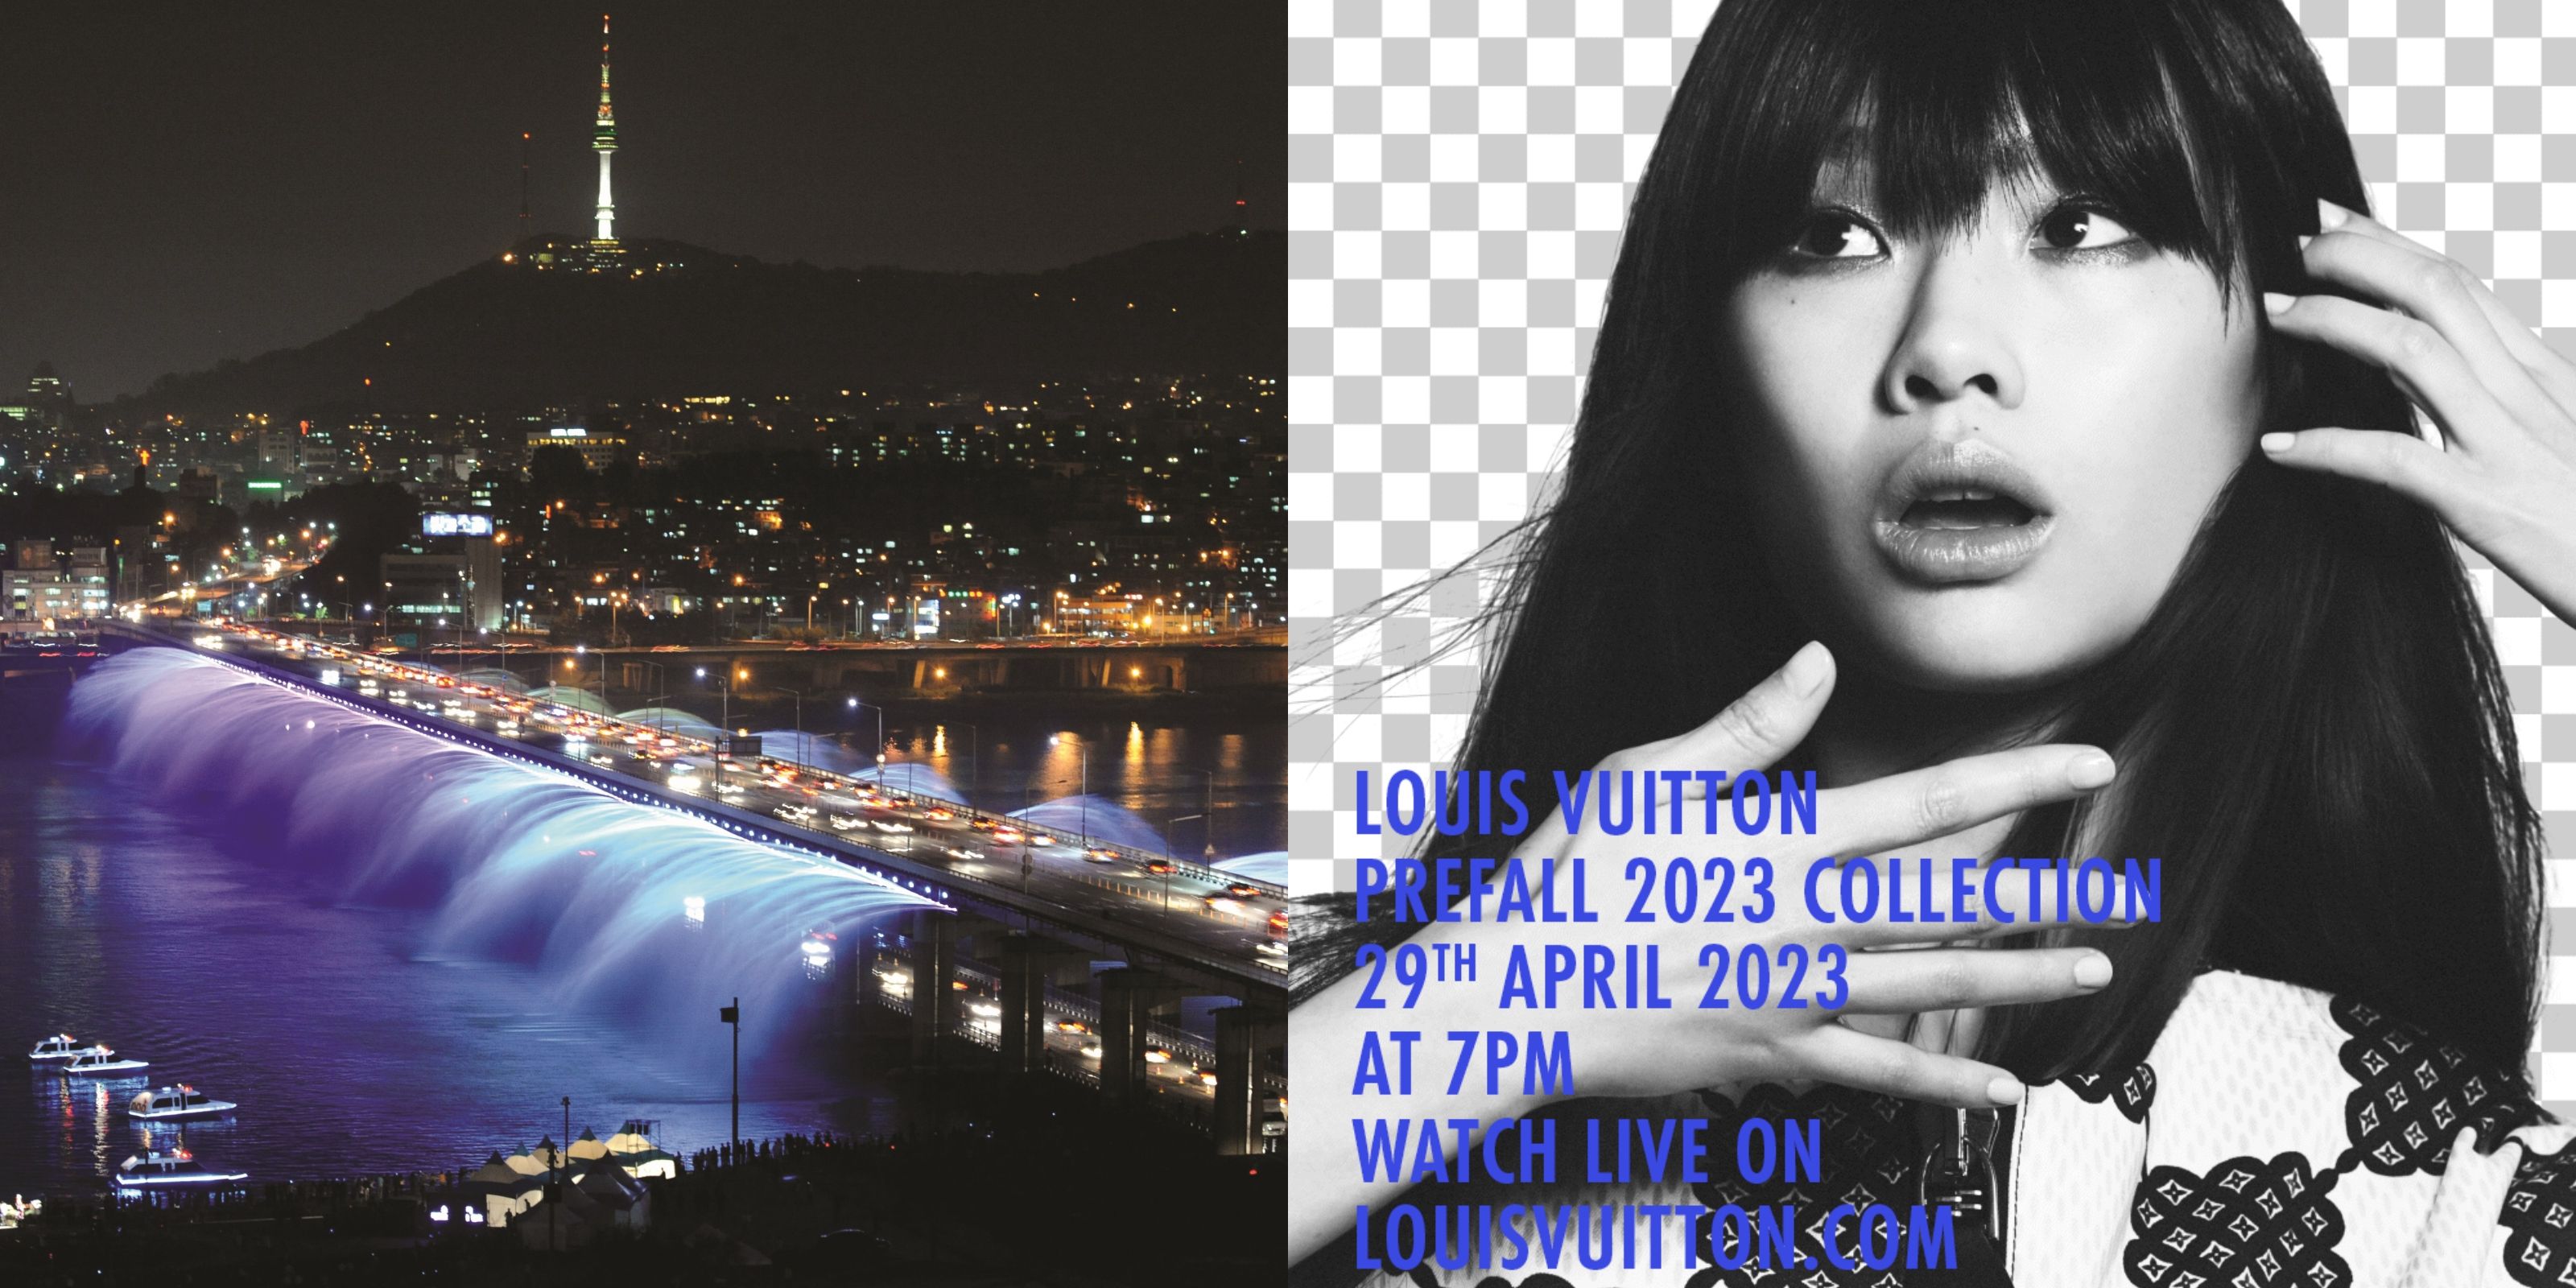 Louis Vuitton Store Antioch, CA 94509 - Last Updated October 2023